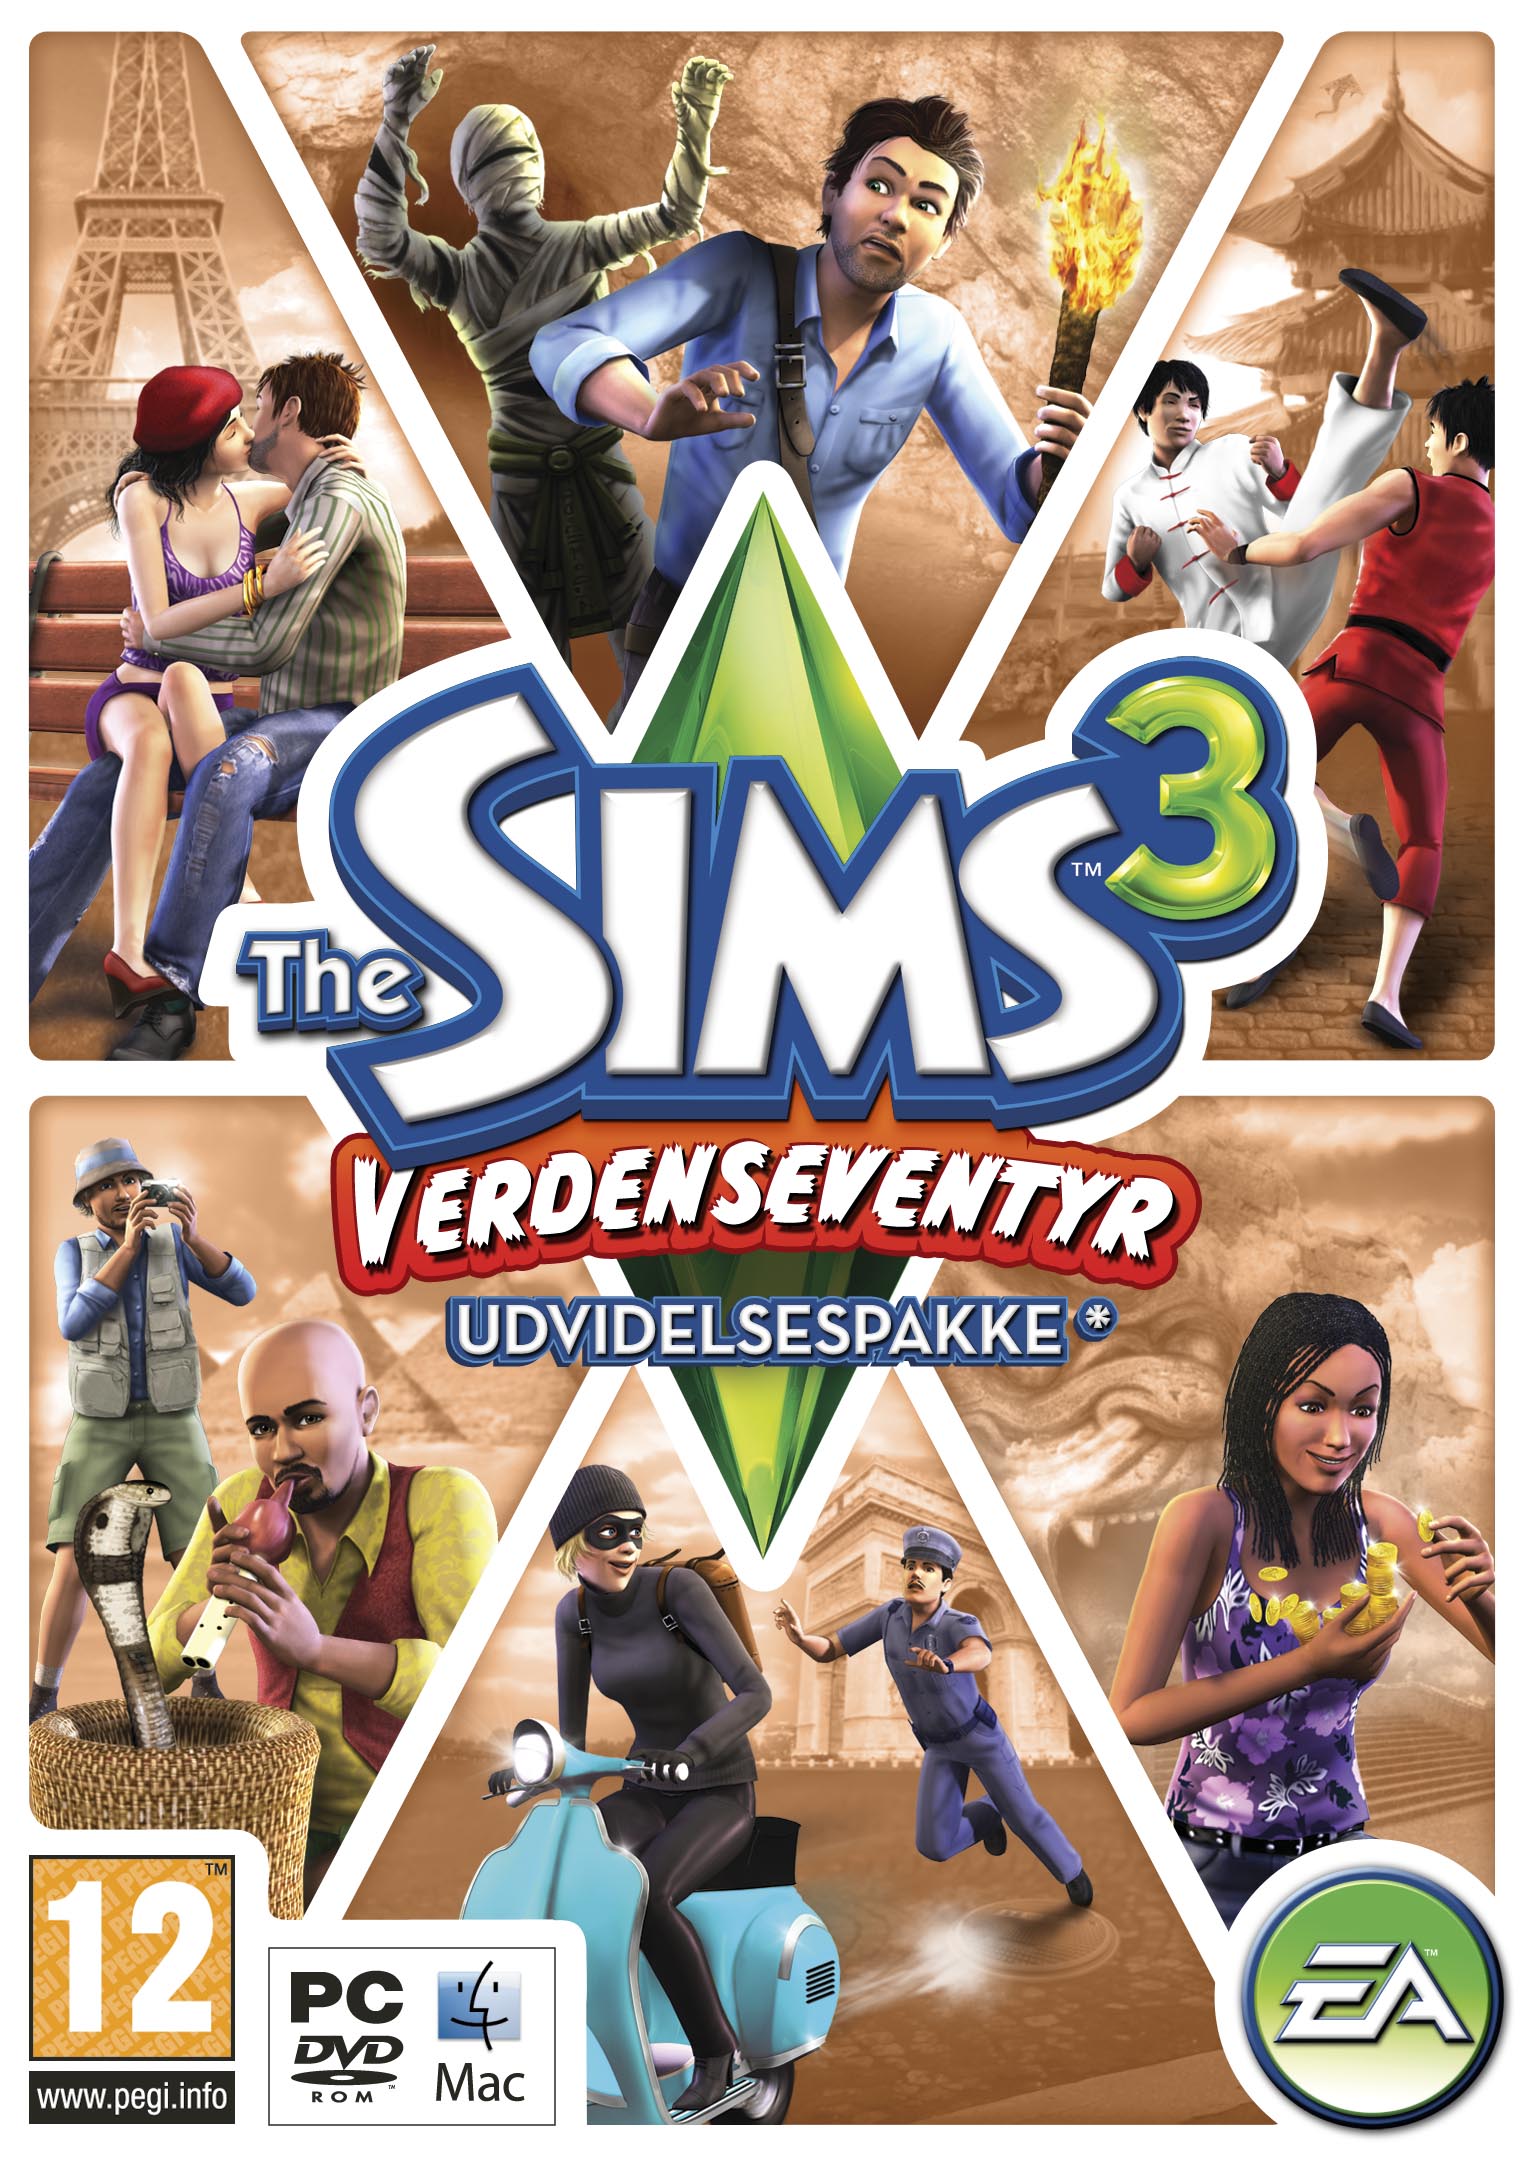 Køb The Sims 3: